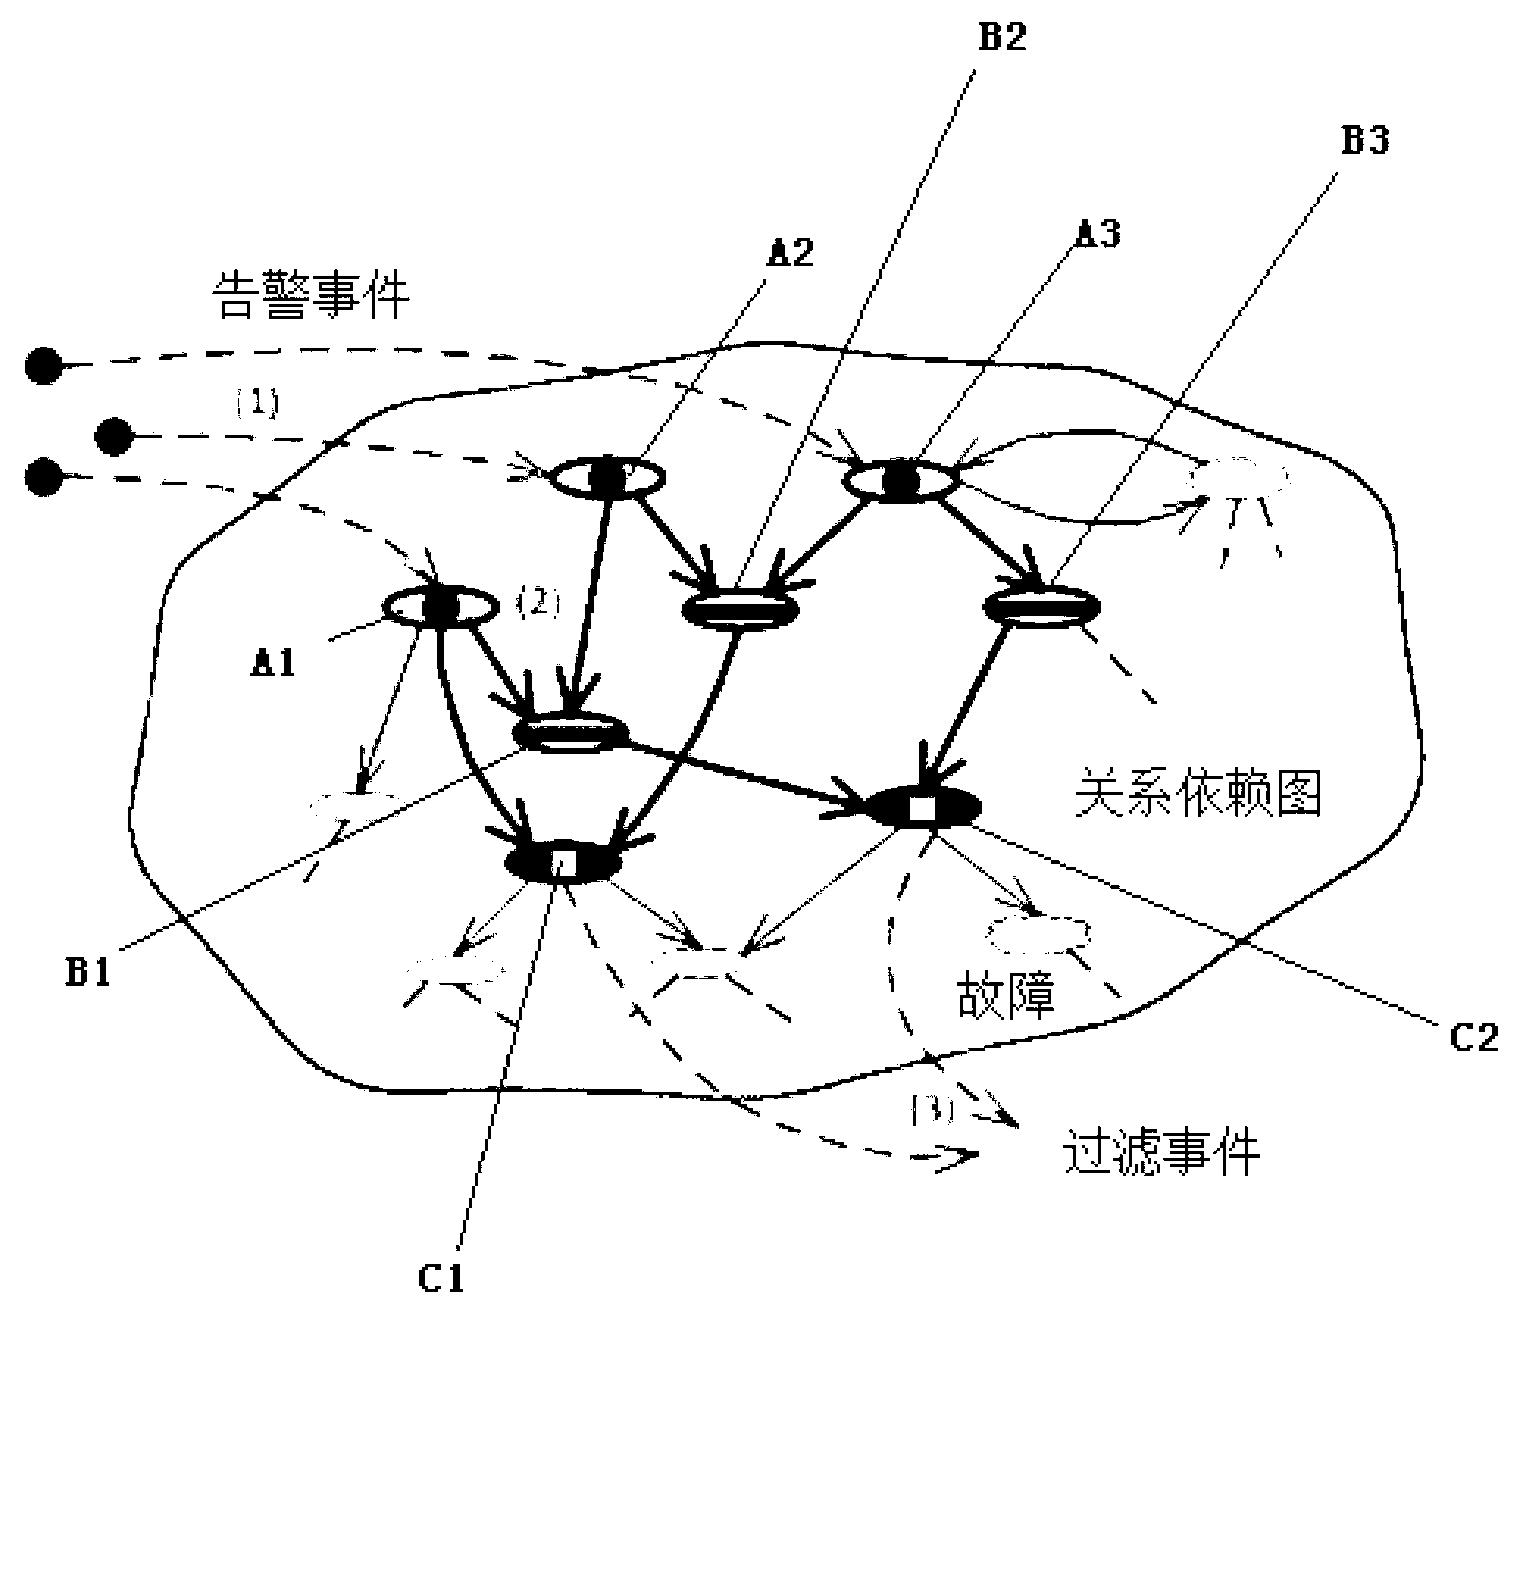 Rapid grid failure positioning method based on dependency graph of entities